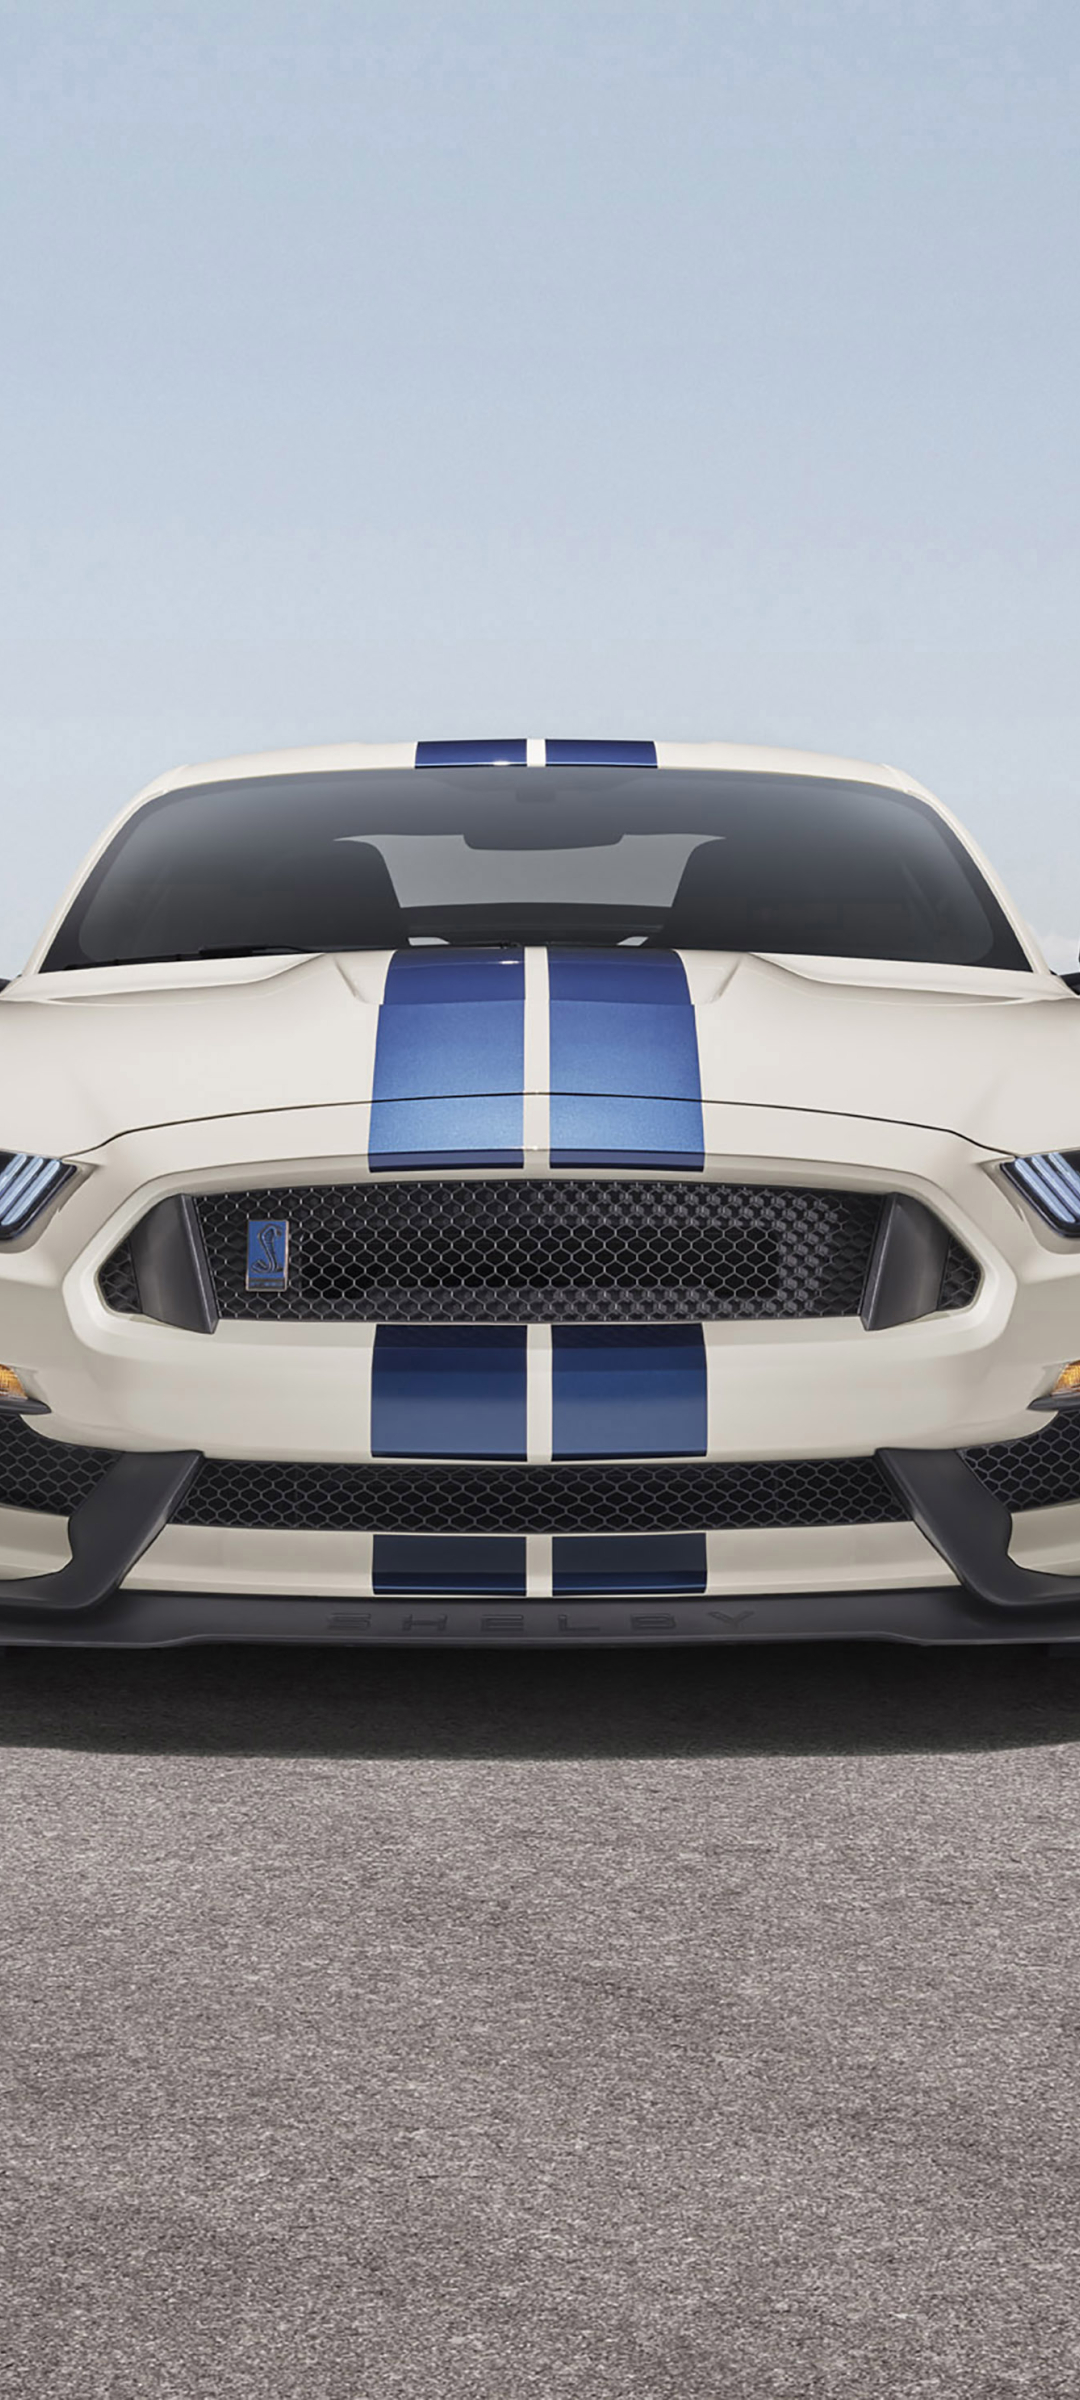 1080x2400 Ford Mustang Shelby Gt350 1080x2400 Resolution Wallpaper Hd Cars 4k Wallpapers Images Photos And Background Wallpapers Den